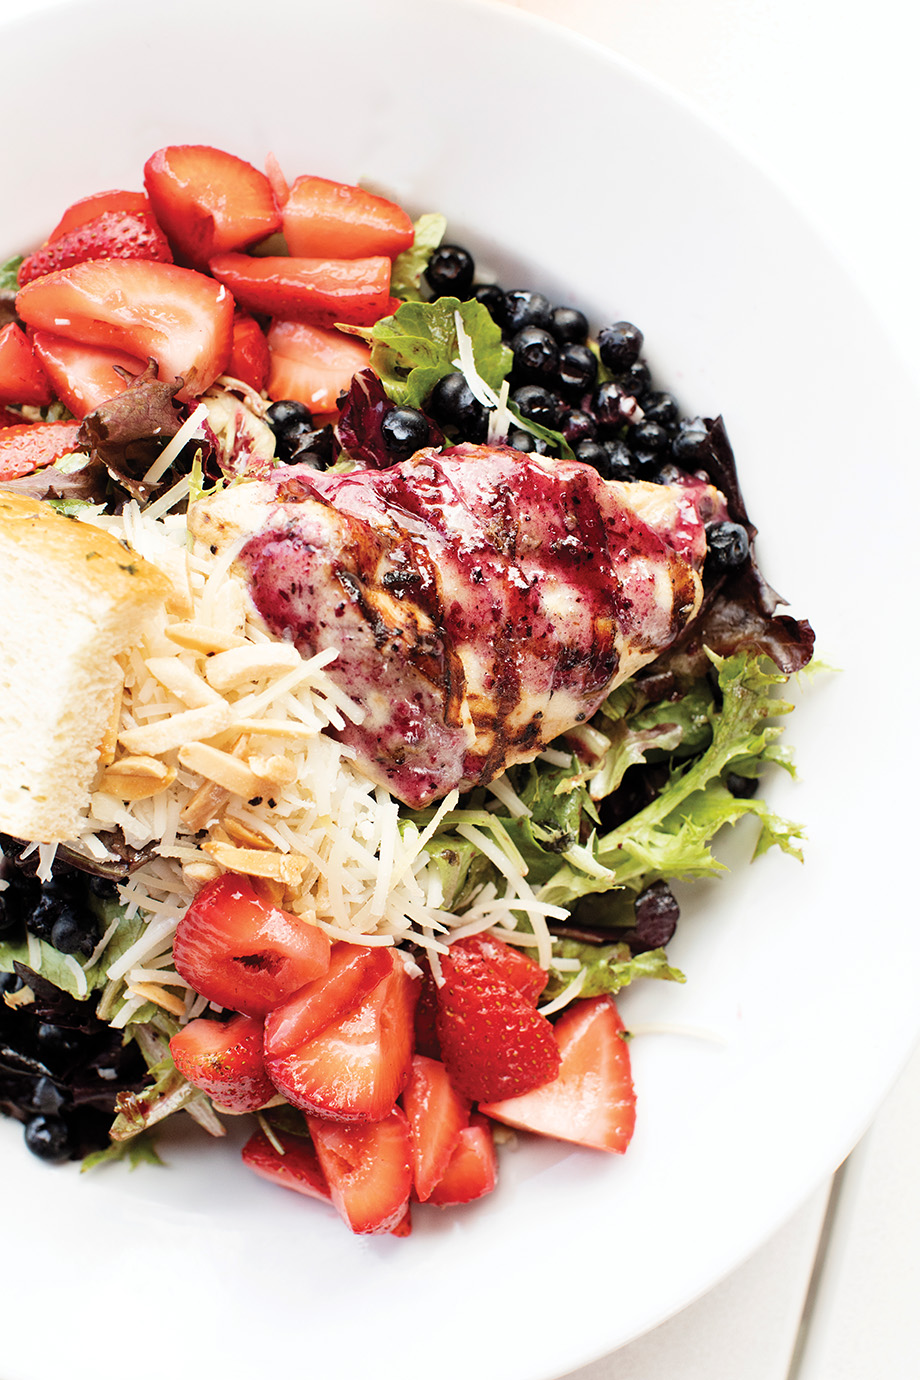 Mixed Berry Salad with Chicken